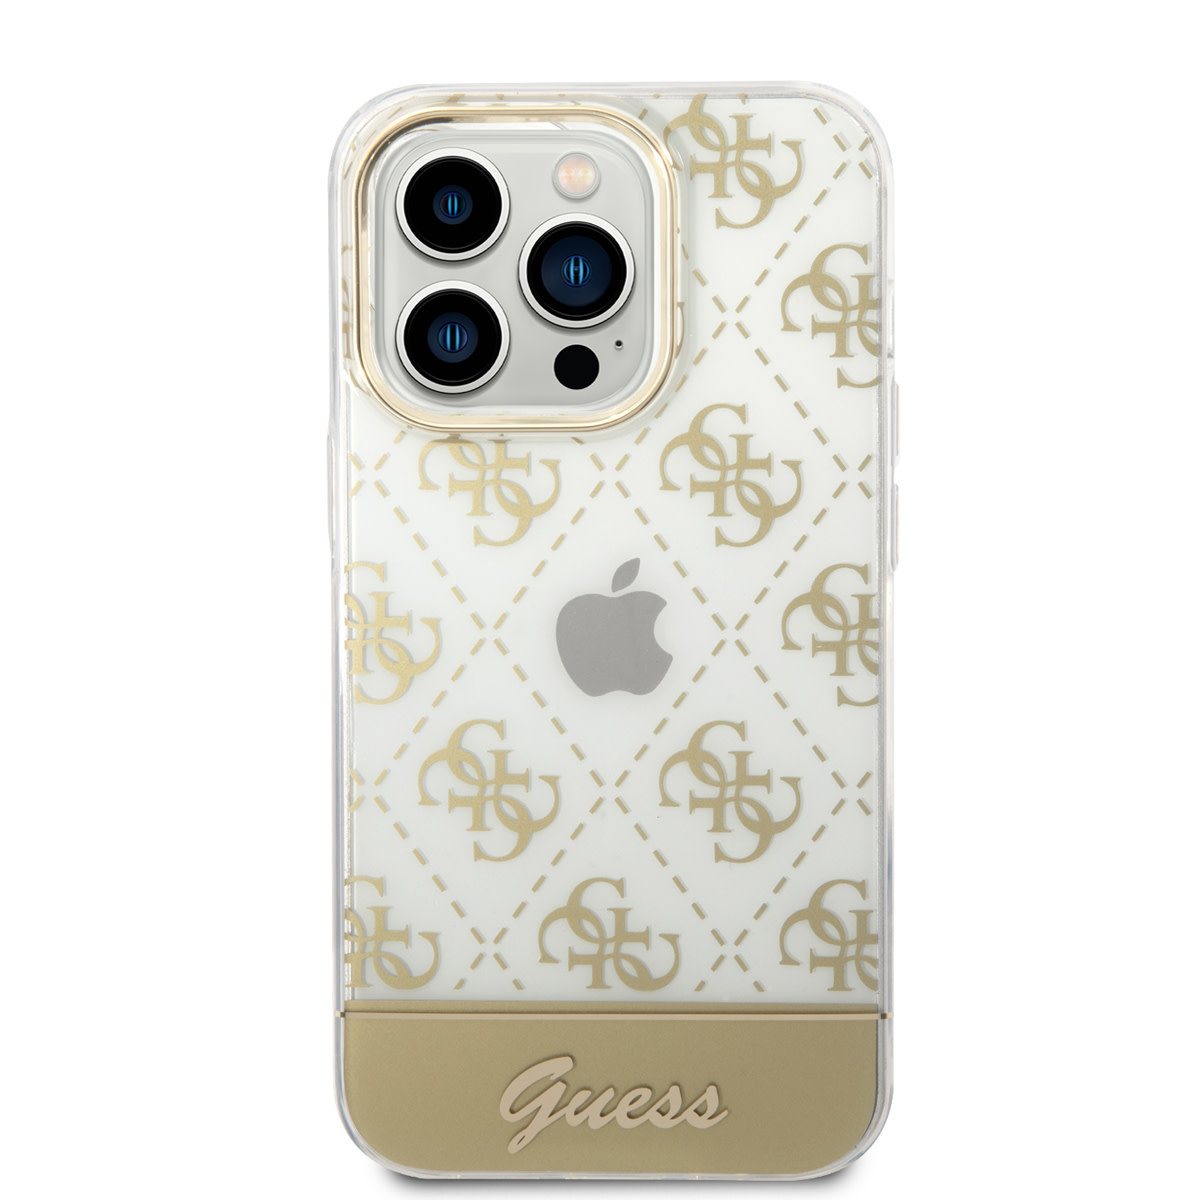 Guess iPhone 14 Pro Hardcase Backcover - 4G Patter